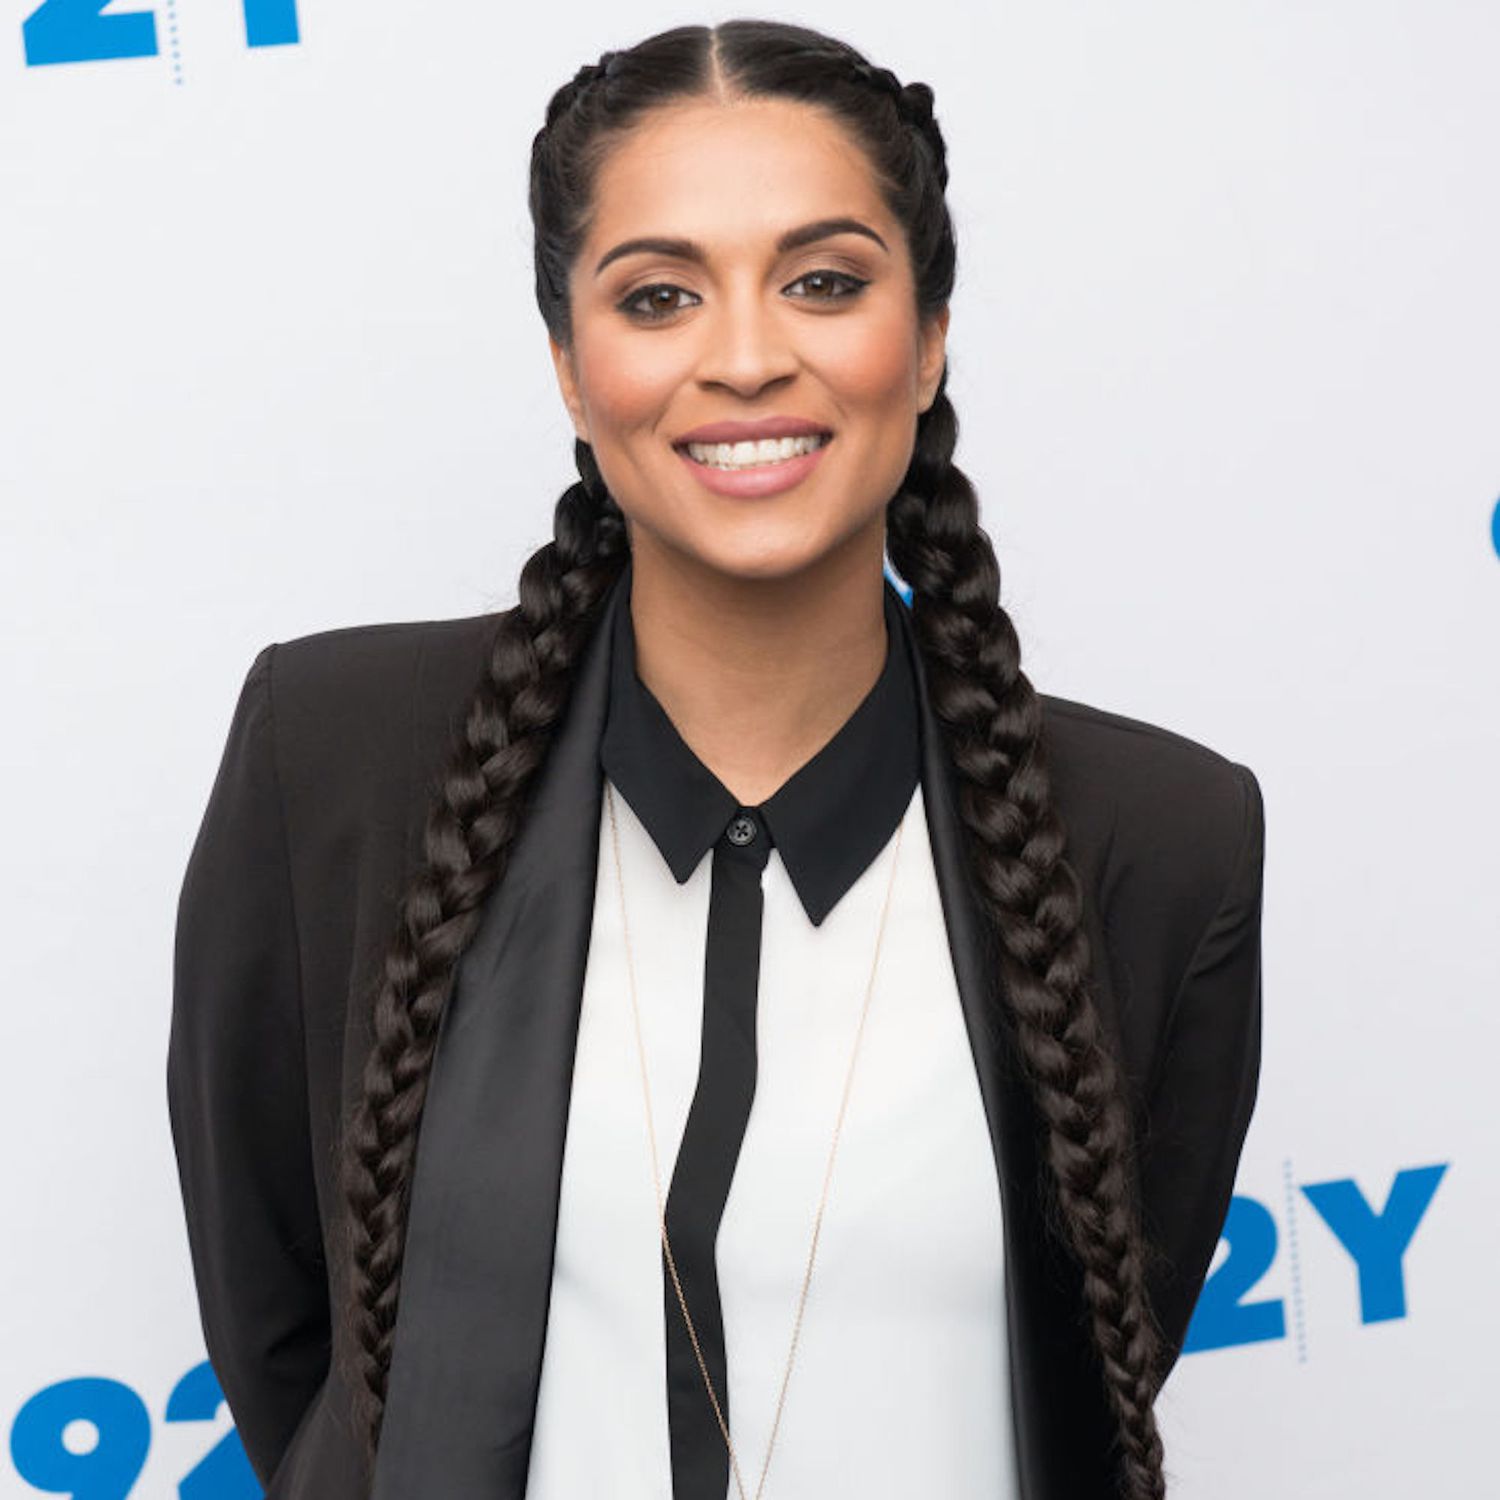 Lilly Singh wears French braided pigtails, a collared black and white shirt, and a black blazer